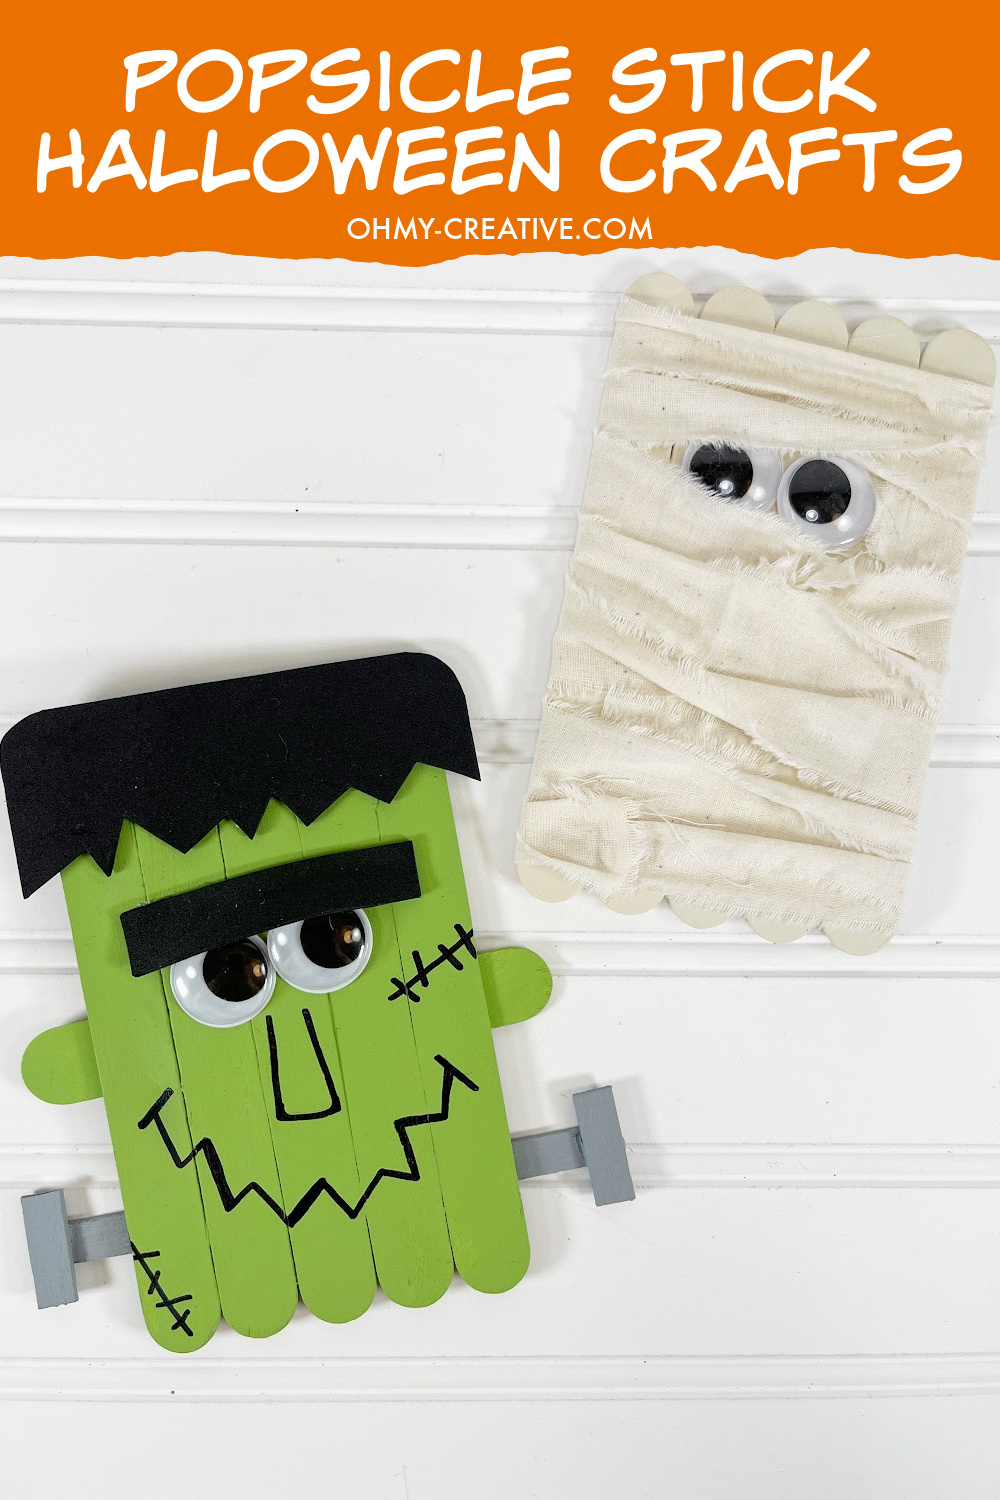 Two easy popsicle stick Halloween crafts - Frankenstein craft and a mummy craft laying on a white background.